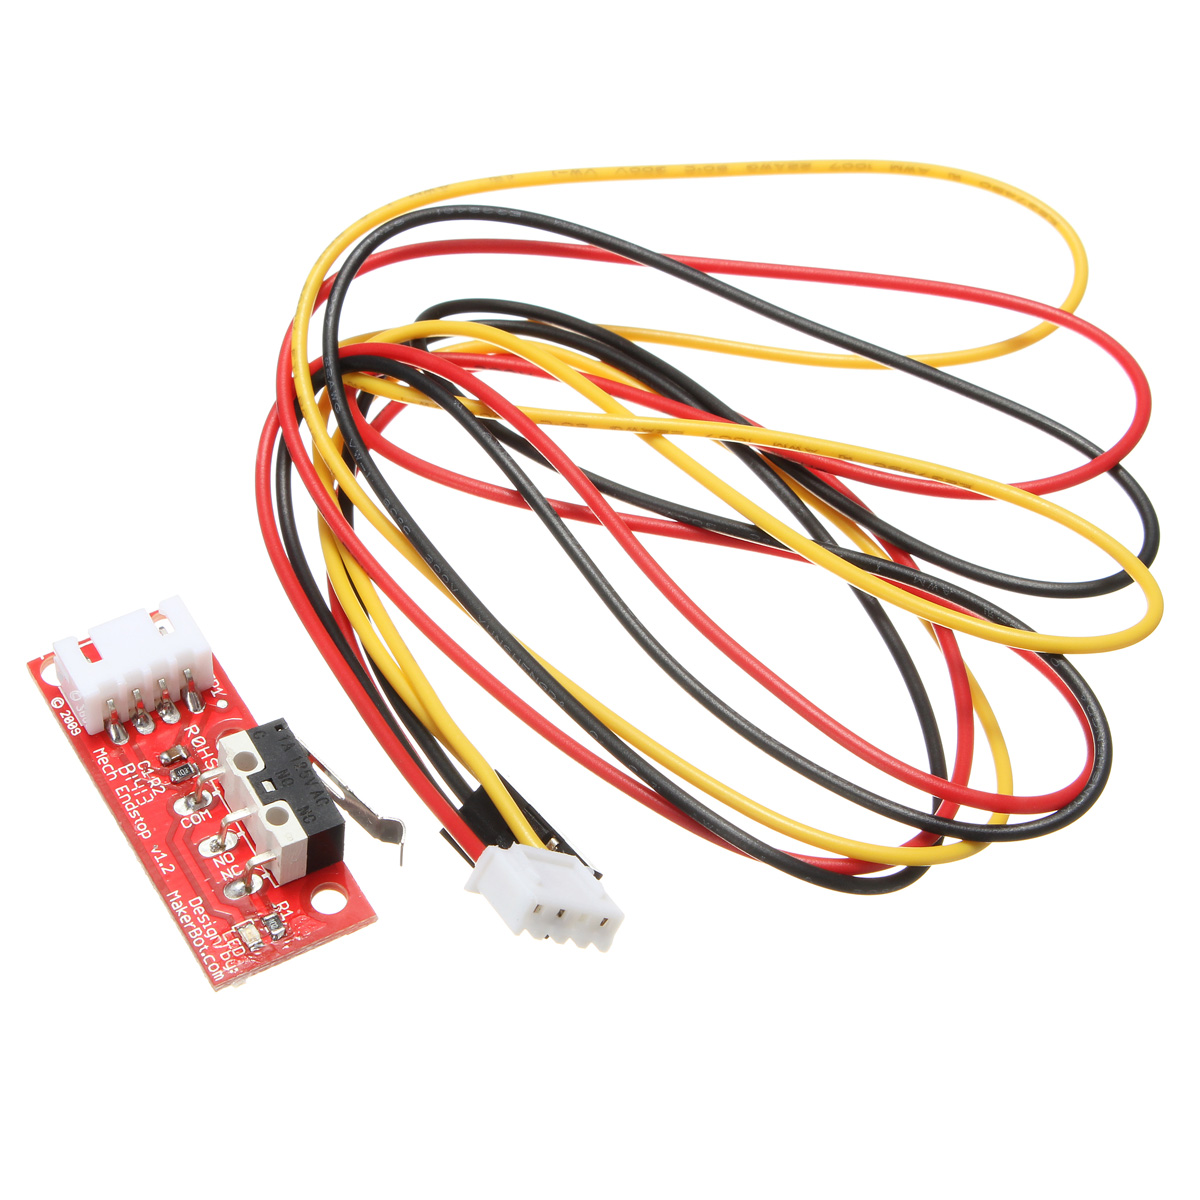 RAMPS 1.4 Endstop Switch For RepRap Mendel 3D Printer With 70cm Cable 7